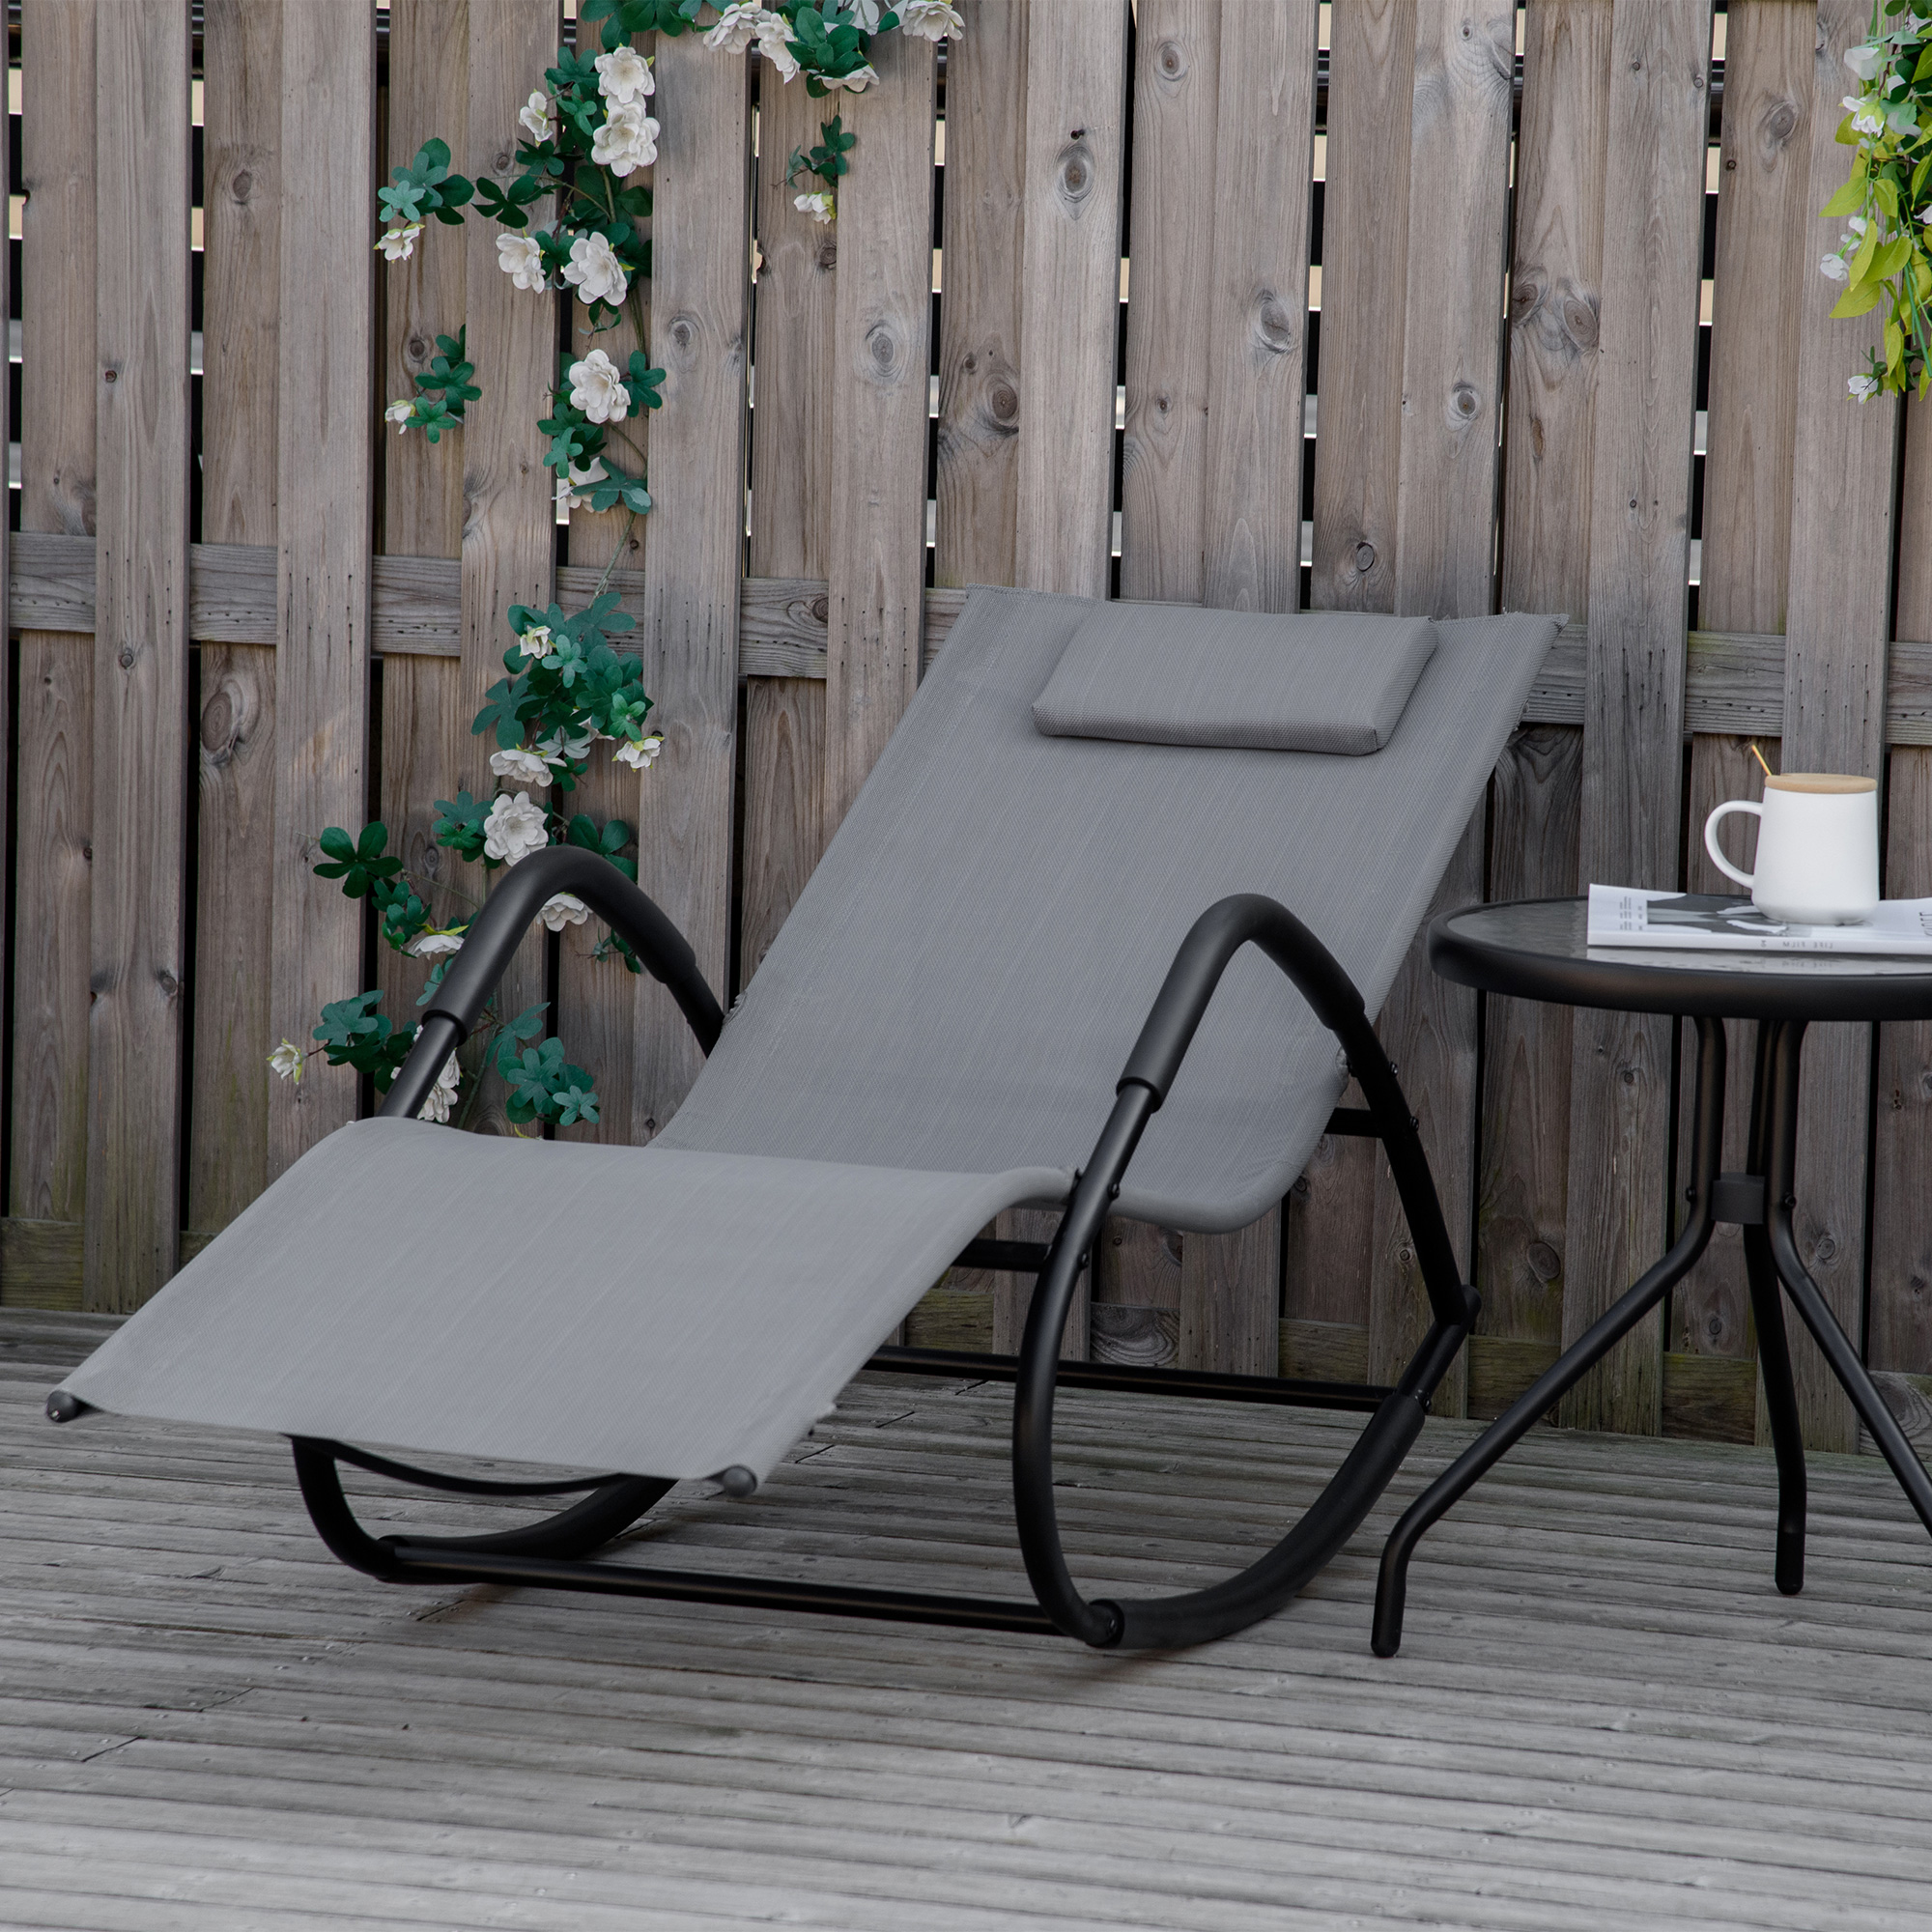 Outsunny Rocking Chair for Sunbathing, Lawn, Garden or Pool, Gray - image 2 of 9